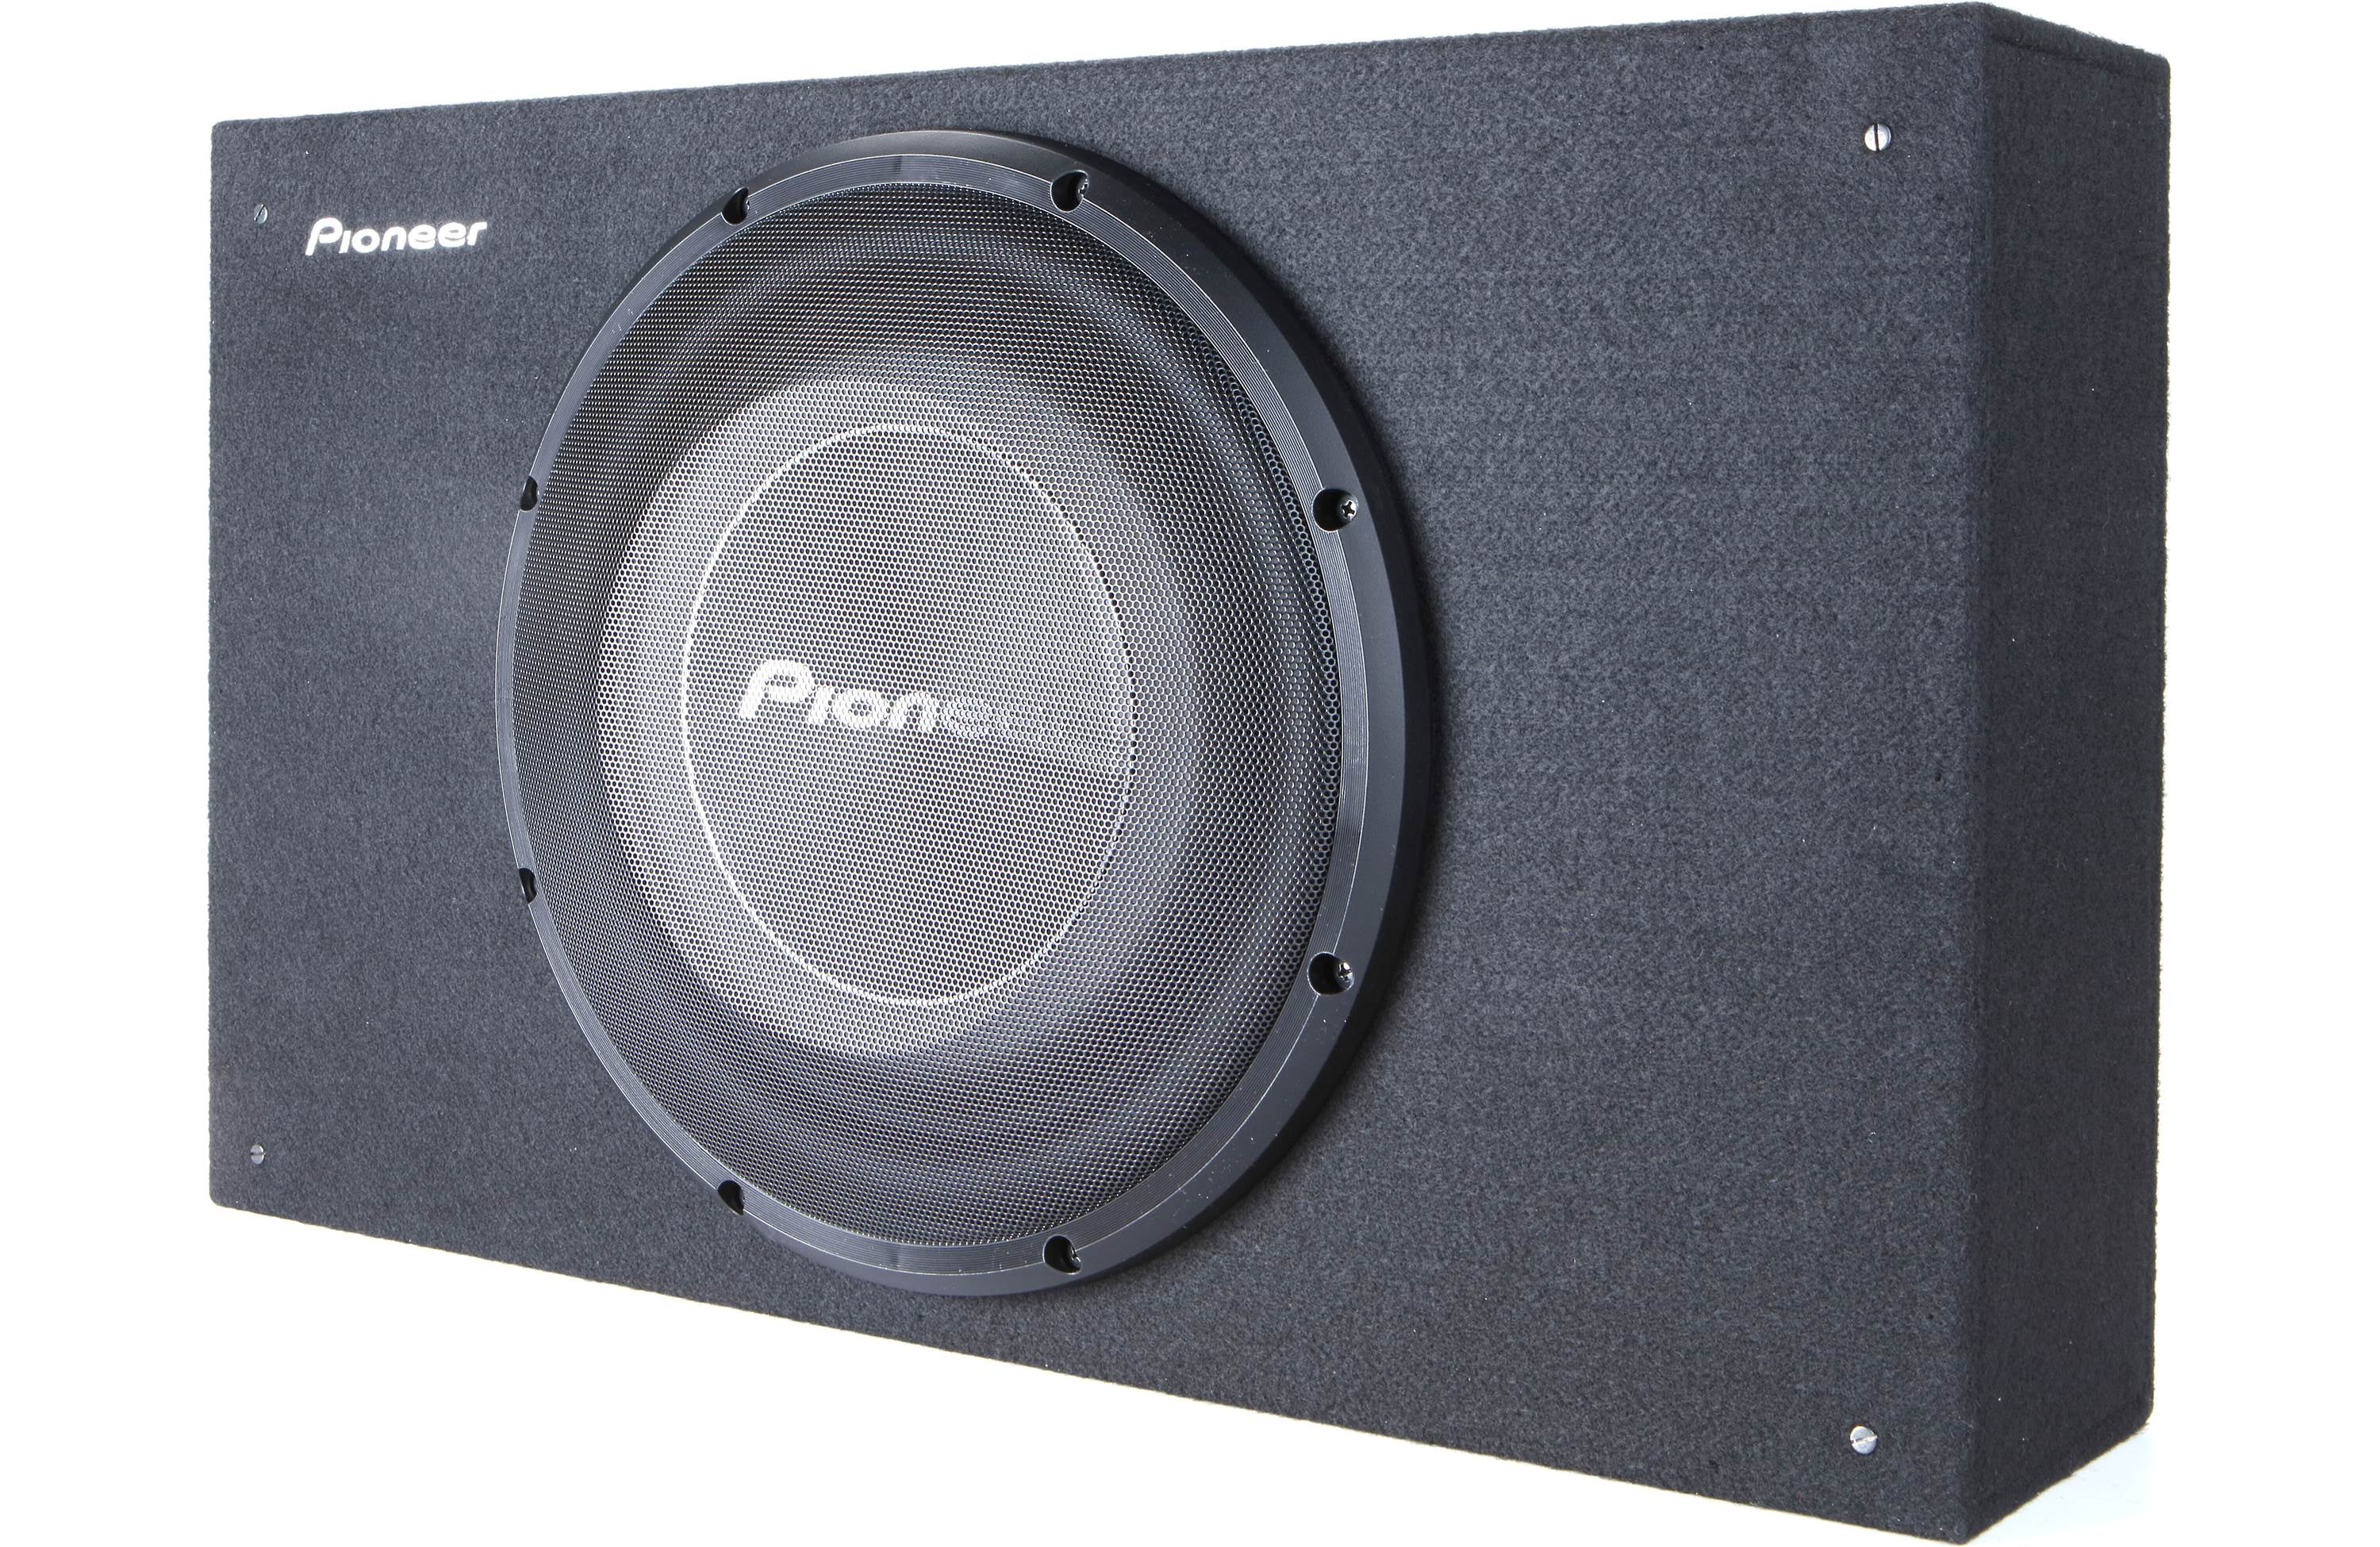 30CM SUBWOOFER PRE-LOADED IN SEALED ENCLOSURE (1300W) – PIONEER – Auto  Lubumbashi